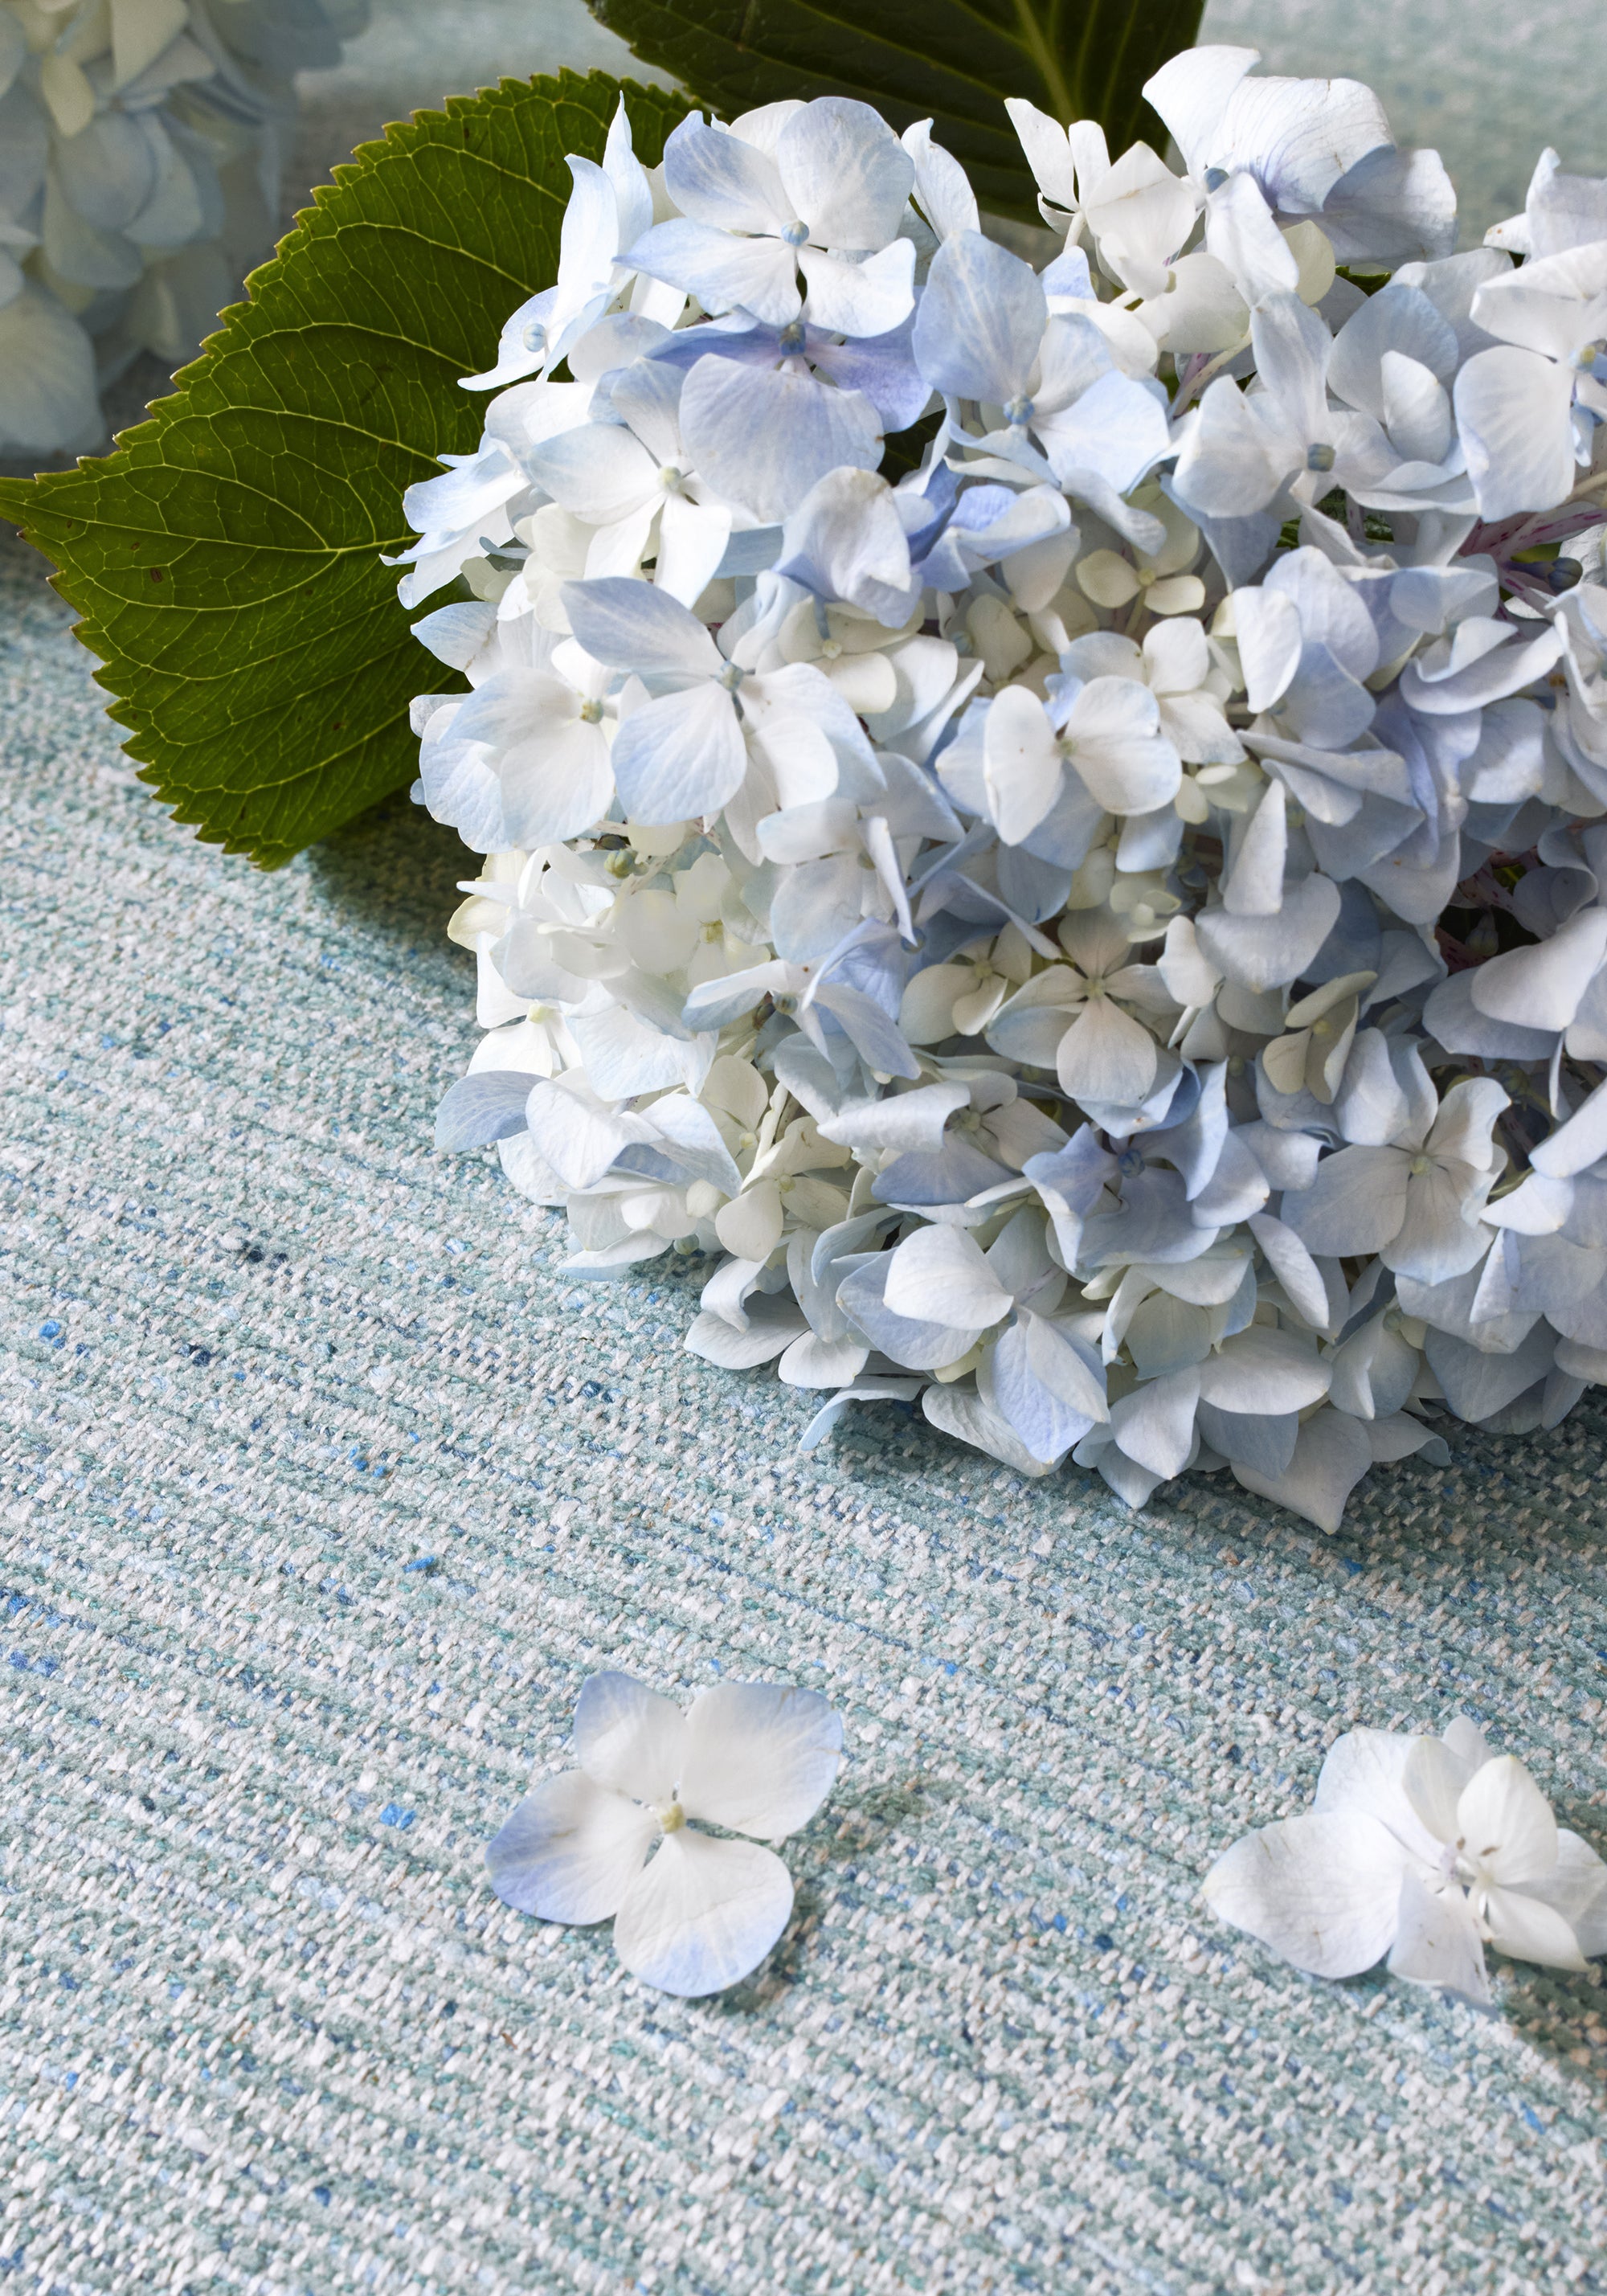 Flowers laying on Elgin stain resistant fabric in seaglass color - pattern number W80939 - by Thibaut fabrics